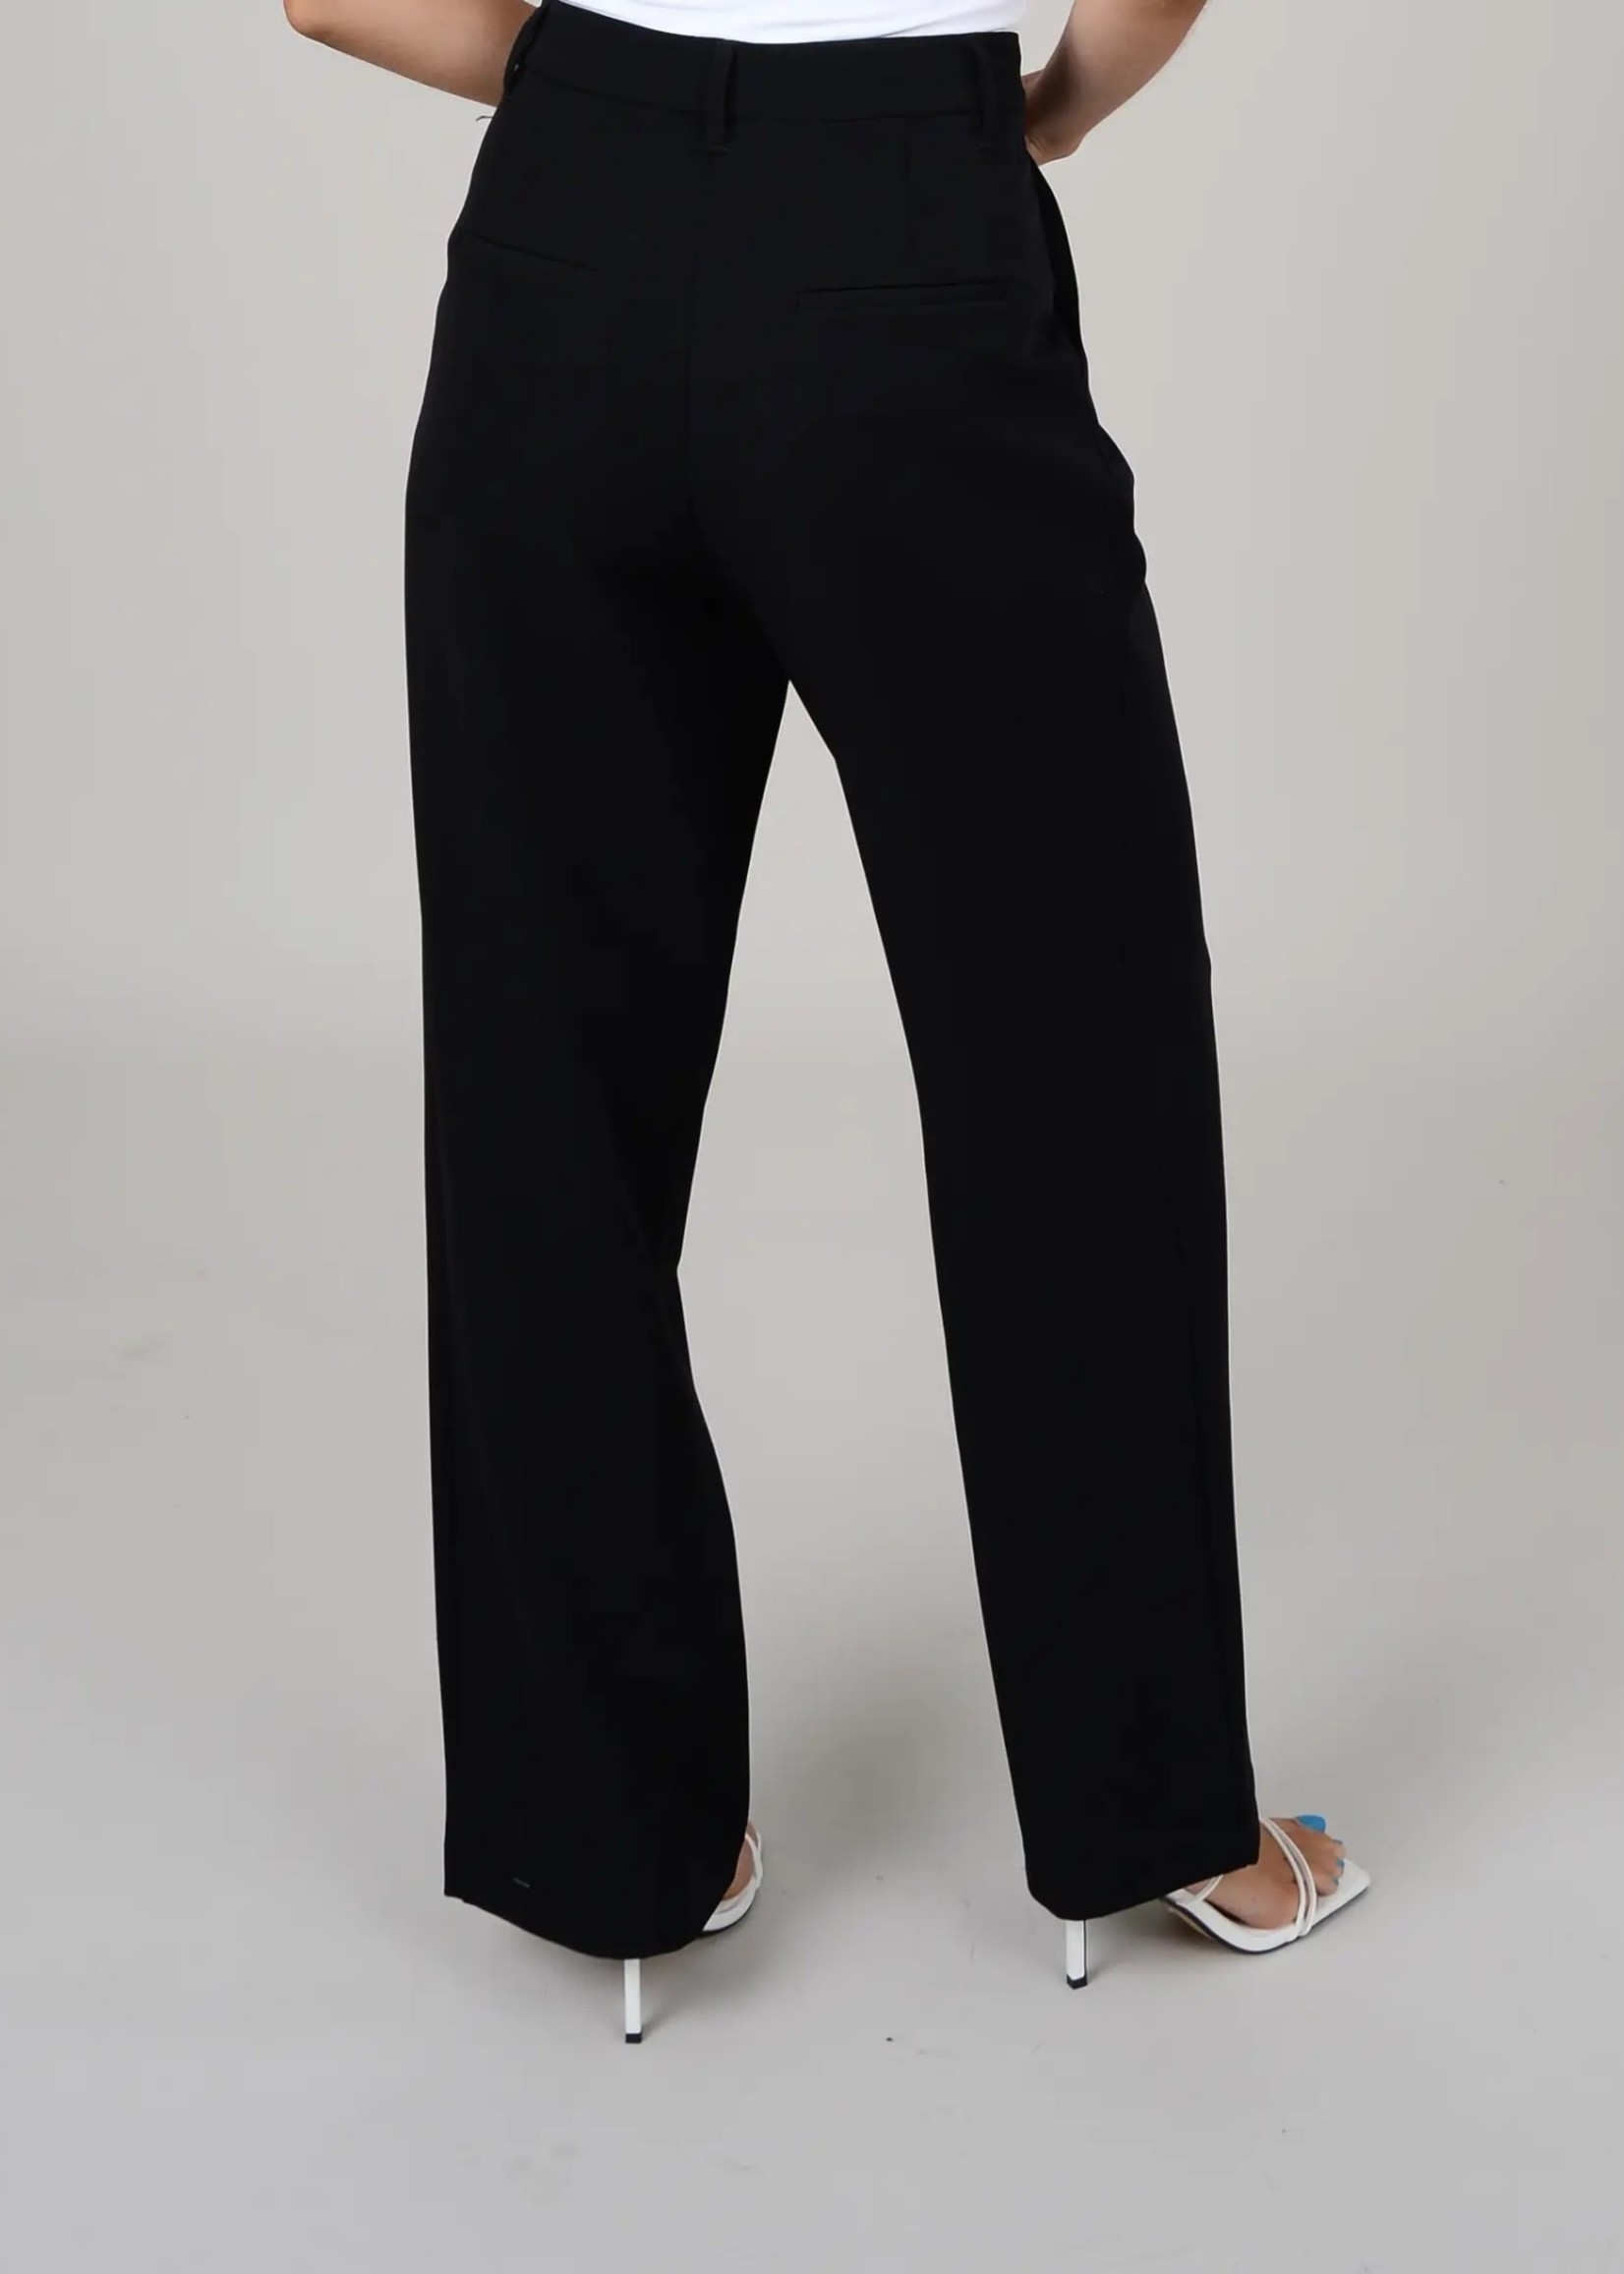 RD STYLE Brynn Double Pleat Pant